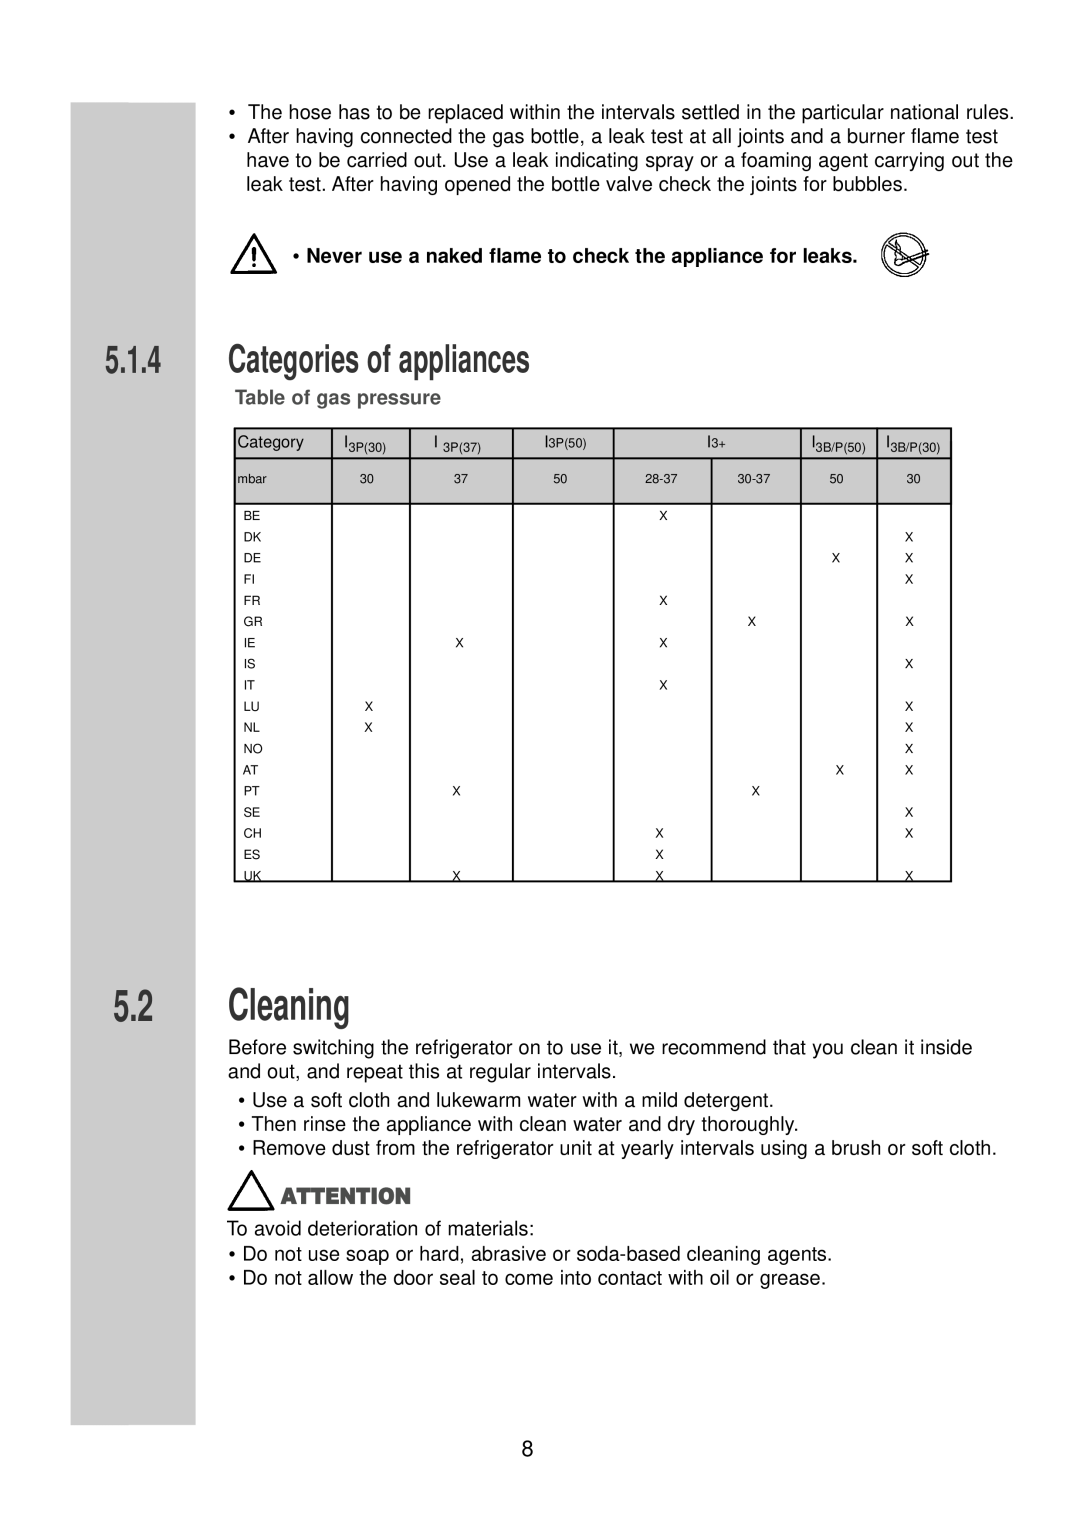 Dometic RGE 2000 installation instructions Cleaning, Categories of appliances, Table of gas pressure 